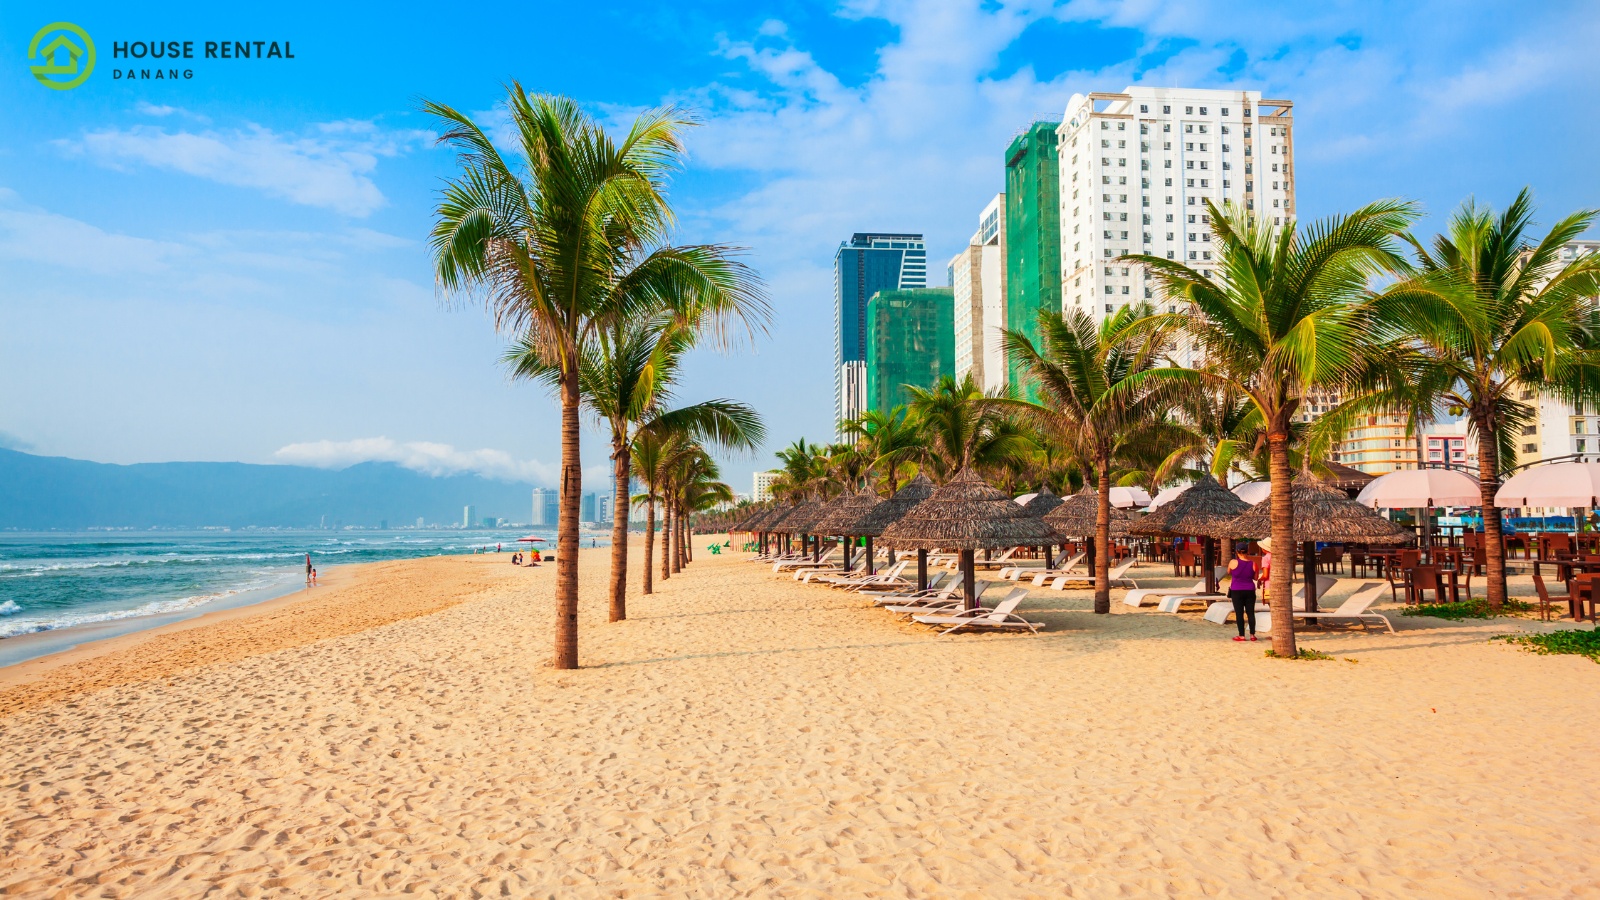 Best Places to Visit in Da nang - A beach with palm trees and buildings in the background.